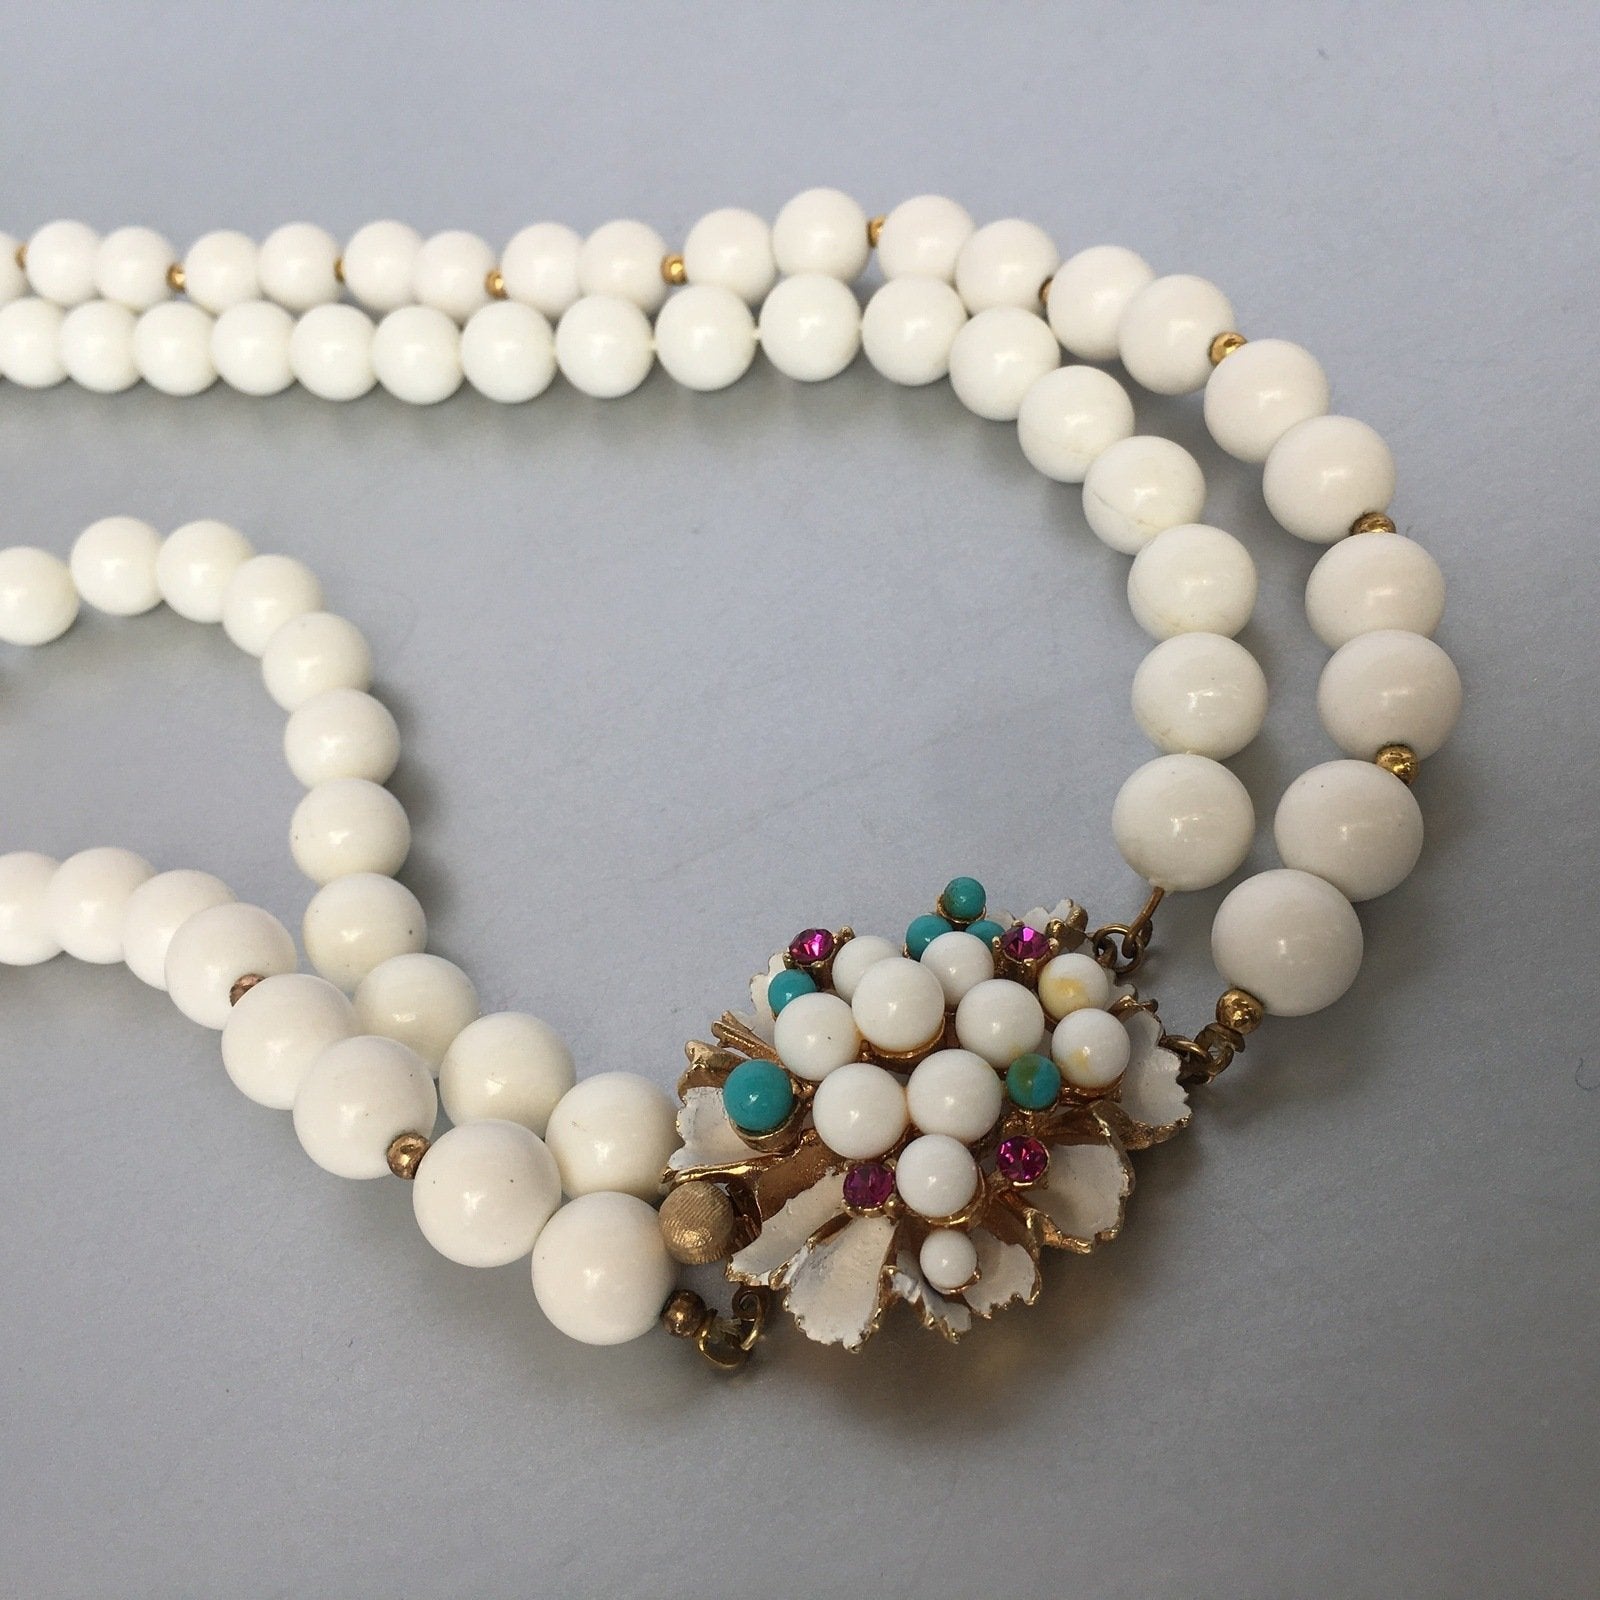 Ornate Floral Clasp White Necklace Vintage Plastic Jewelry